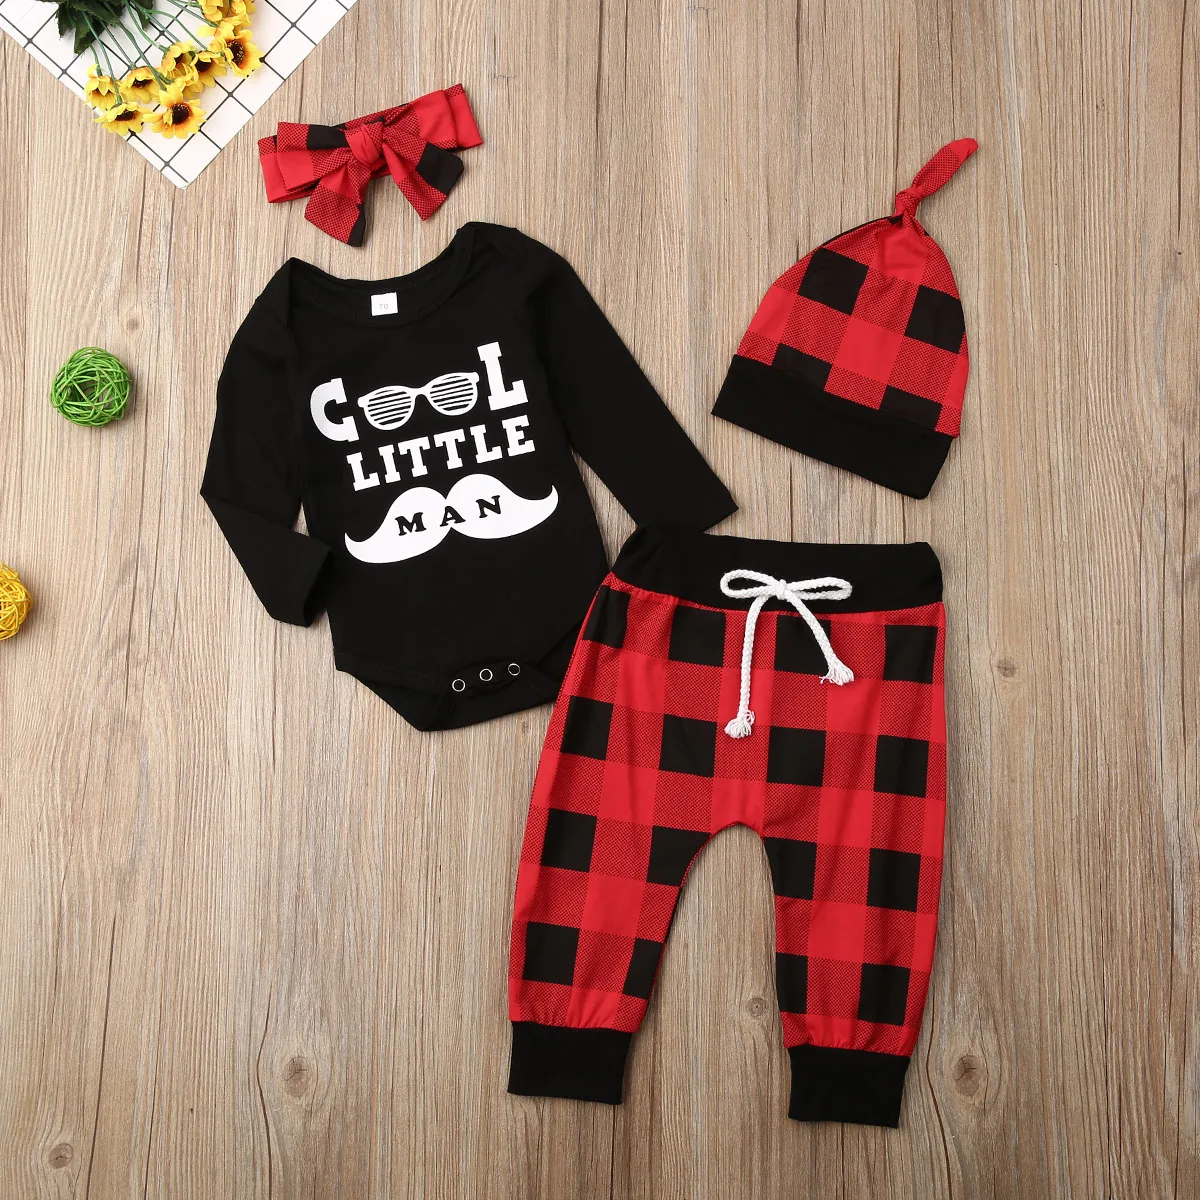 4PCs Infant Newborn Baby Boy Girl Sets Letter Long Sleeve Romper Red Plaid Pants Hat Bowknot Outfits Cute Casual Clothes 0-24M